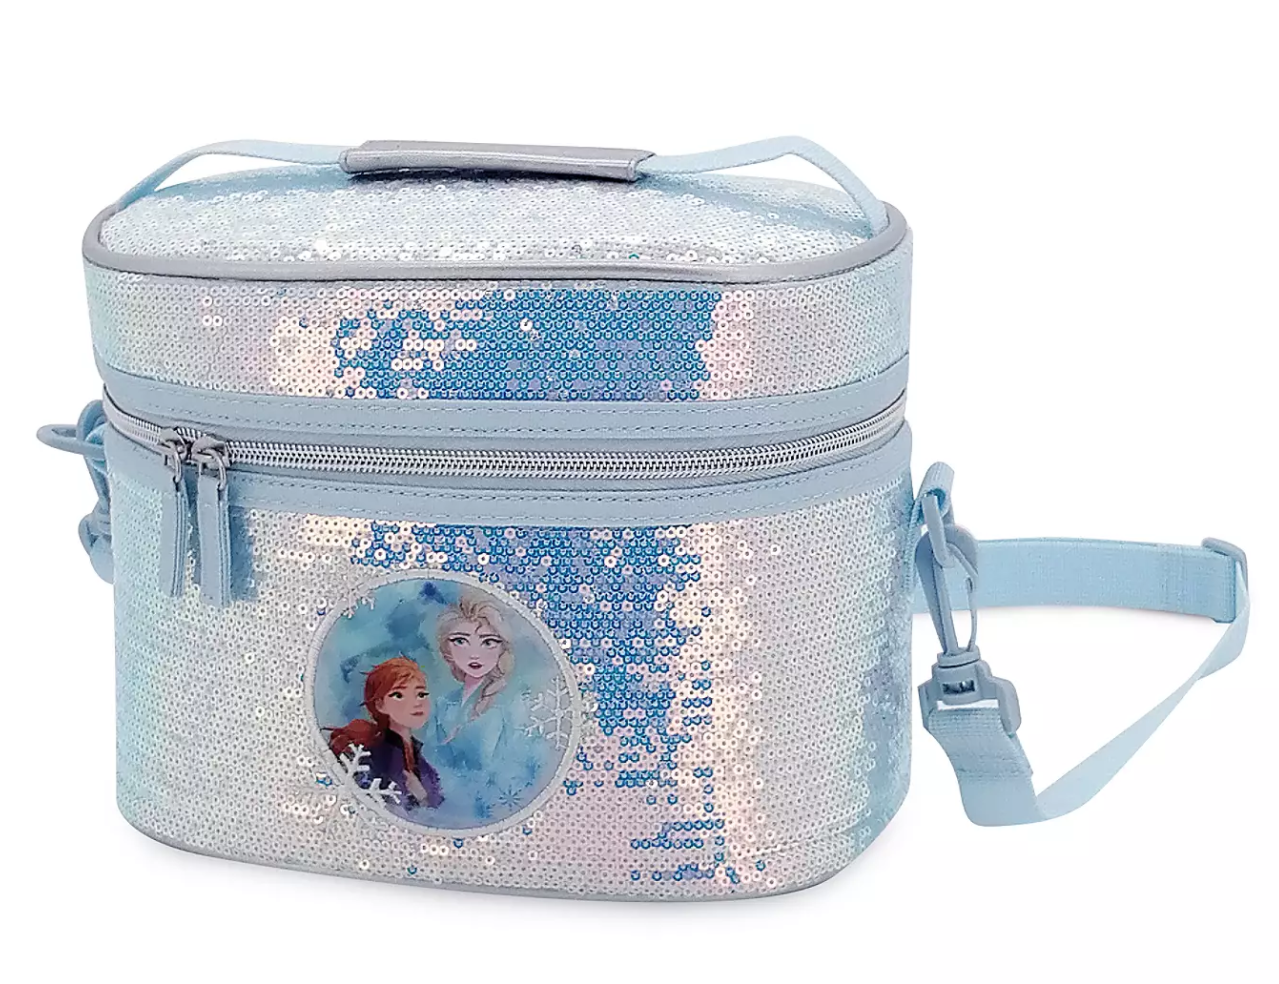 You Can Get a Disney Lunch Box For ONLY $2 with This Back to School Offer!